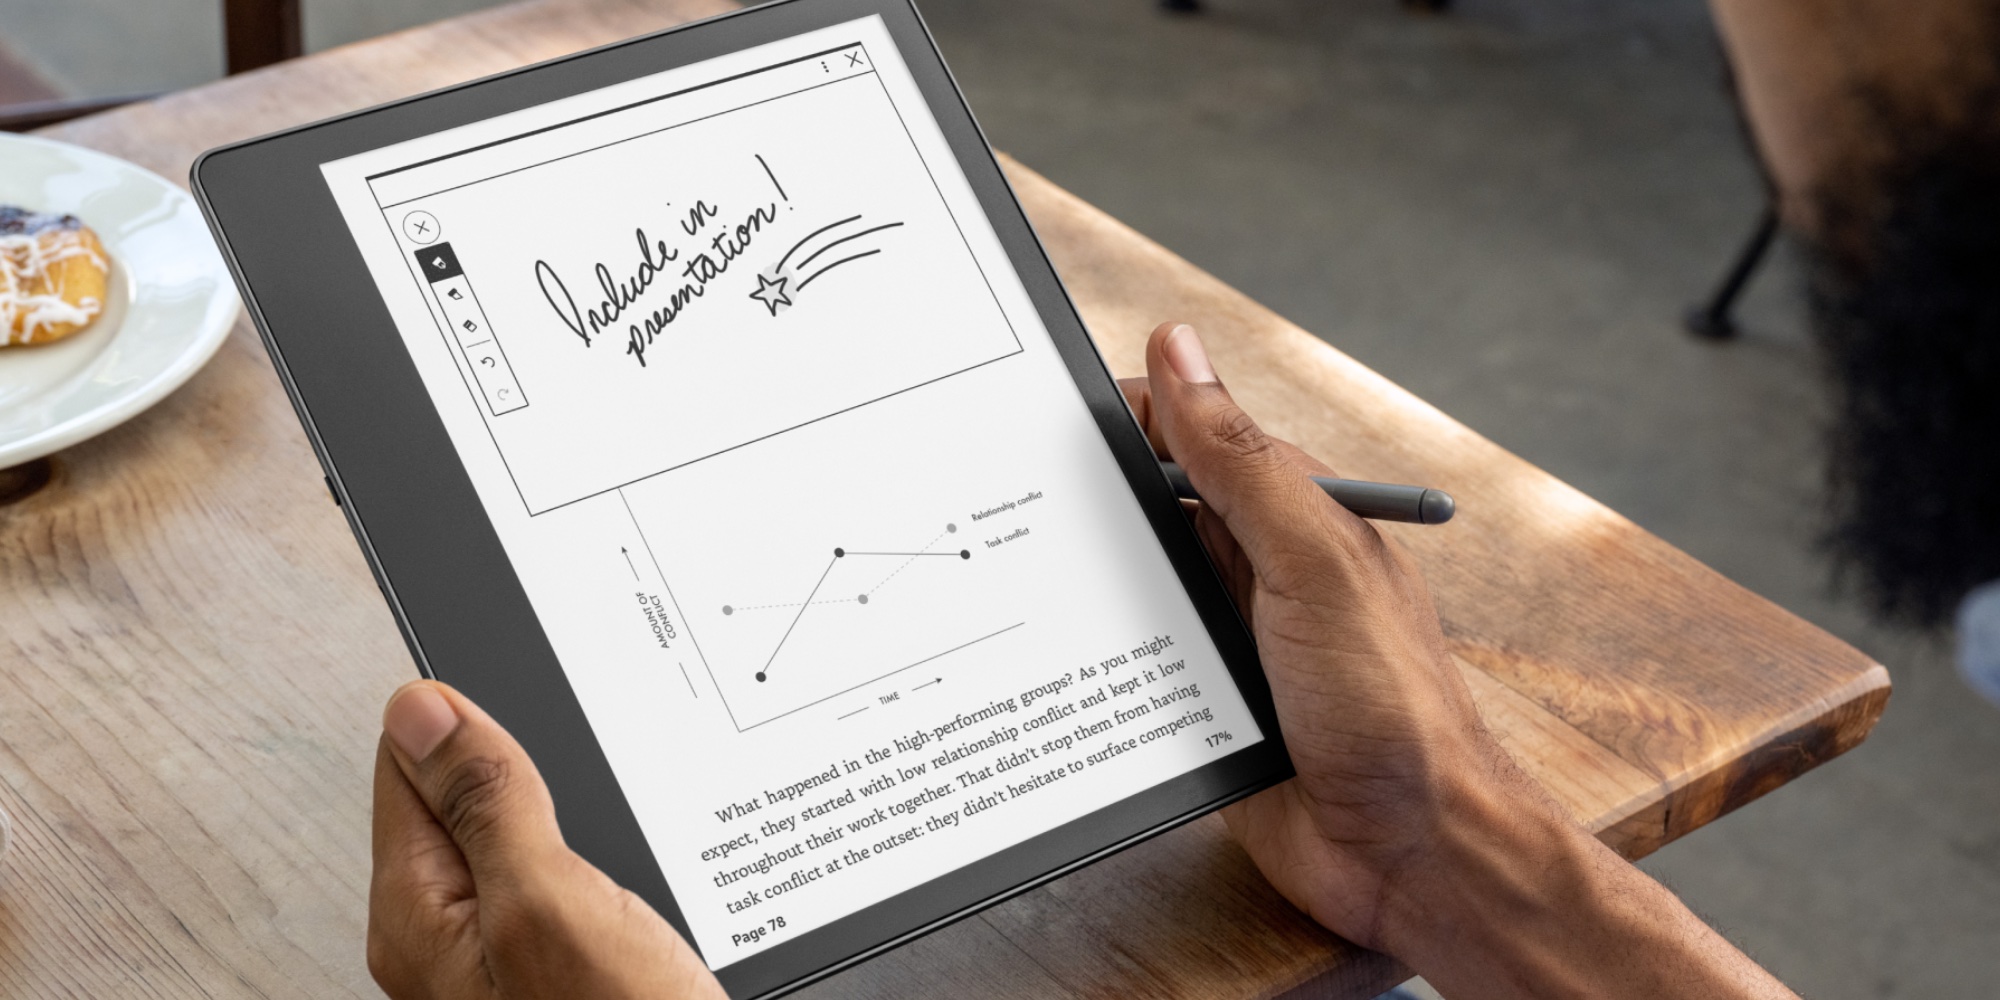 Cyber Monday Kindle Deals 2023: Get The Kindle Scribe At The Lowest Price  Ever